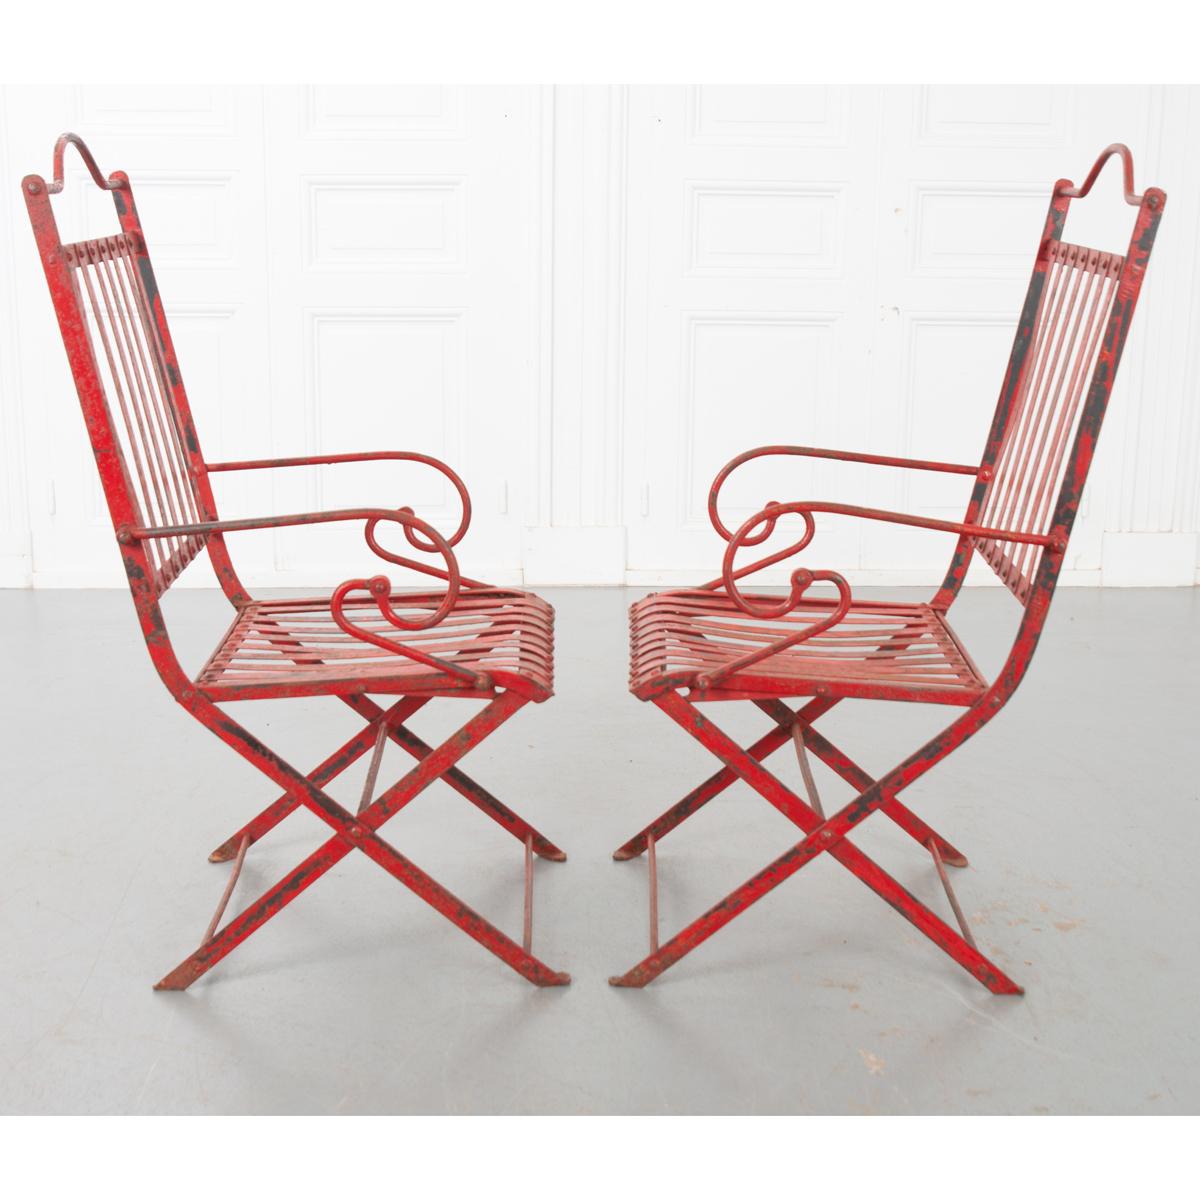 Other Pair of French Painted Metal Garden Chairs